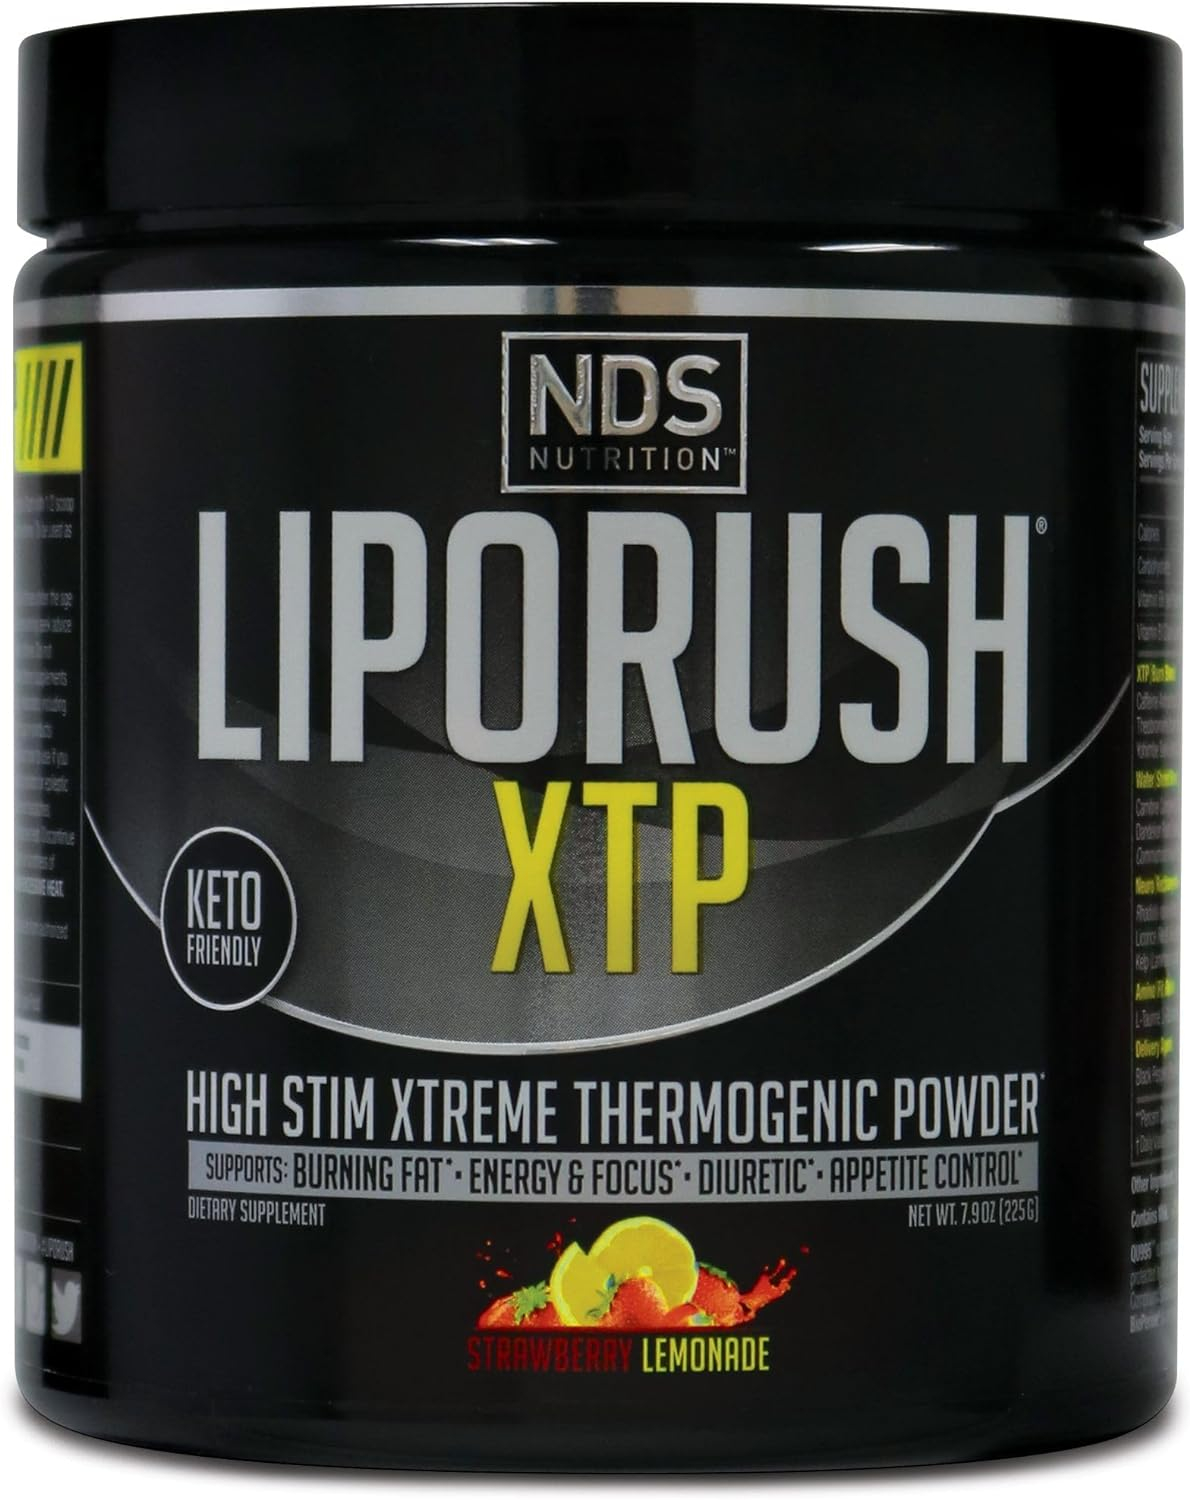 LIPORUSH NDS Nutrition XTP Thermogenic Fat Burner with L-Carnitine - Energy, Focus, and Appetite Control - Extreme Thermogenic Fat Burning Powder Weight Loss - Strawberry Lemonade (45 Servings)